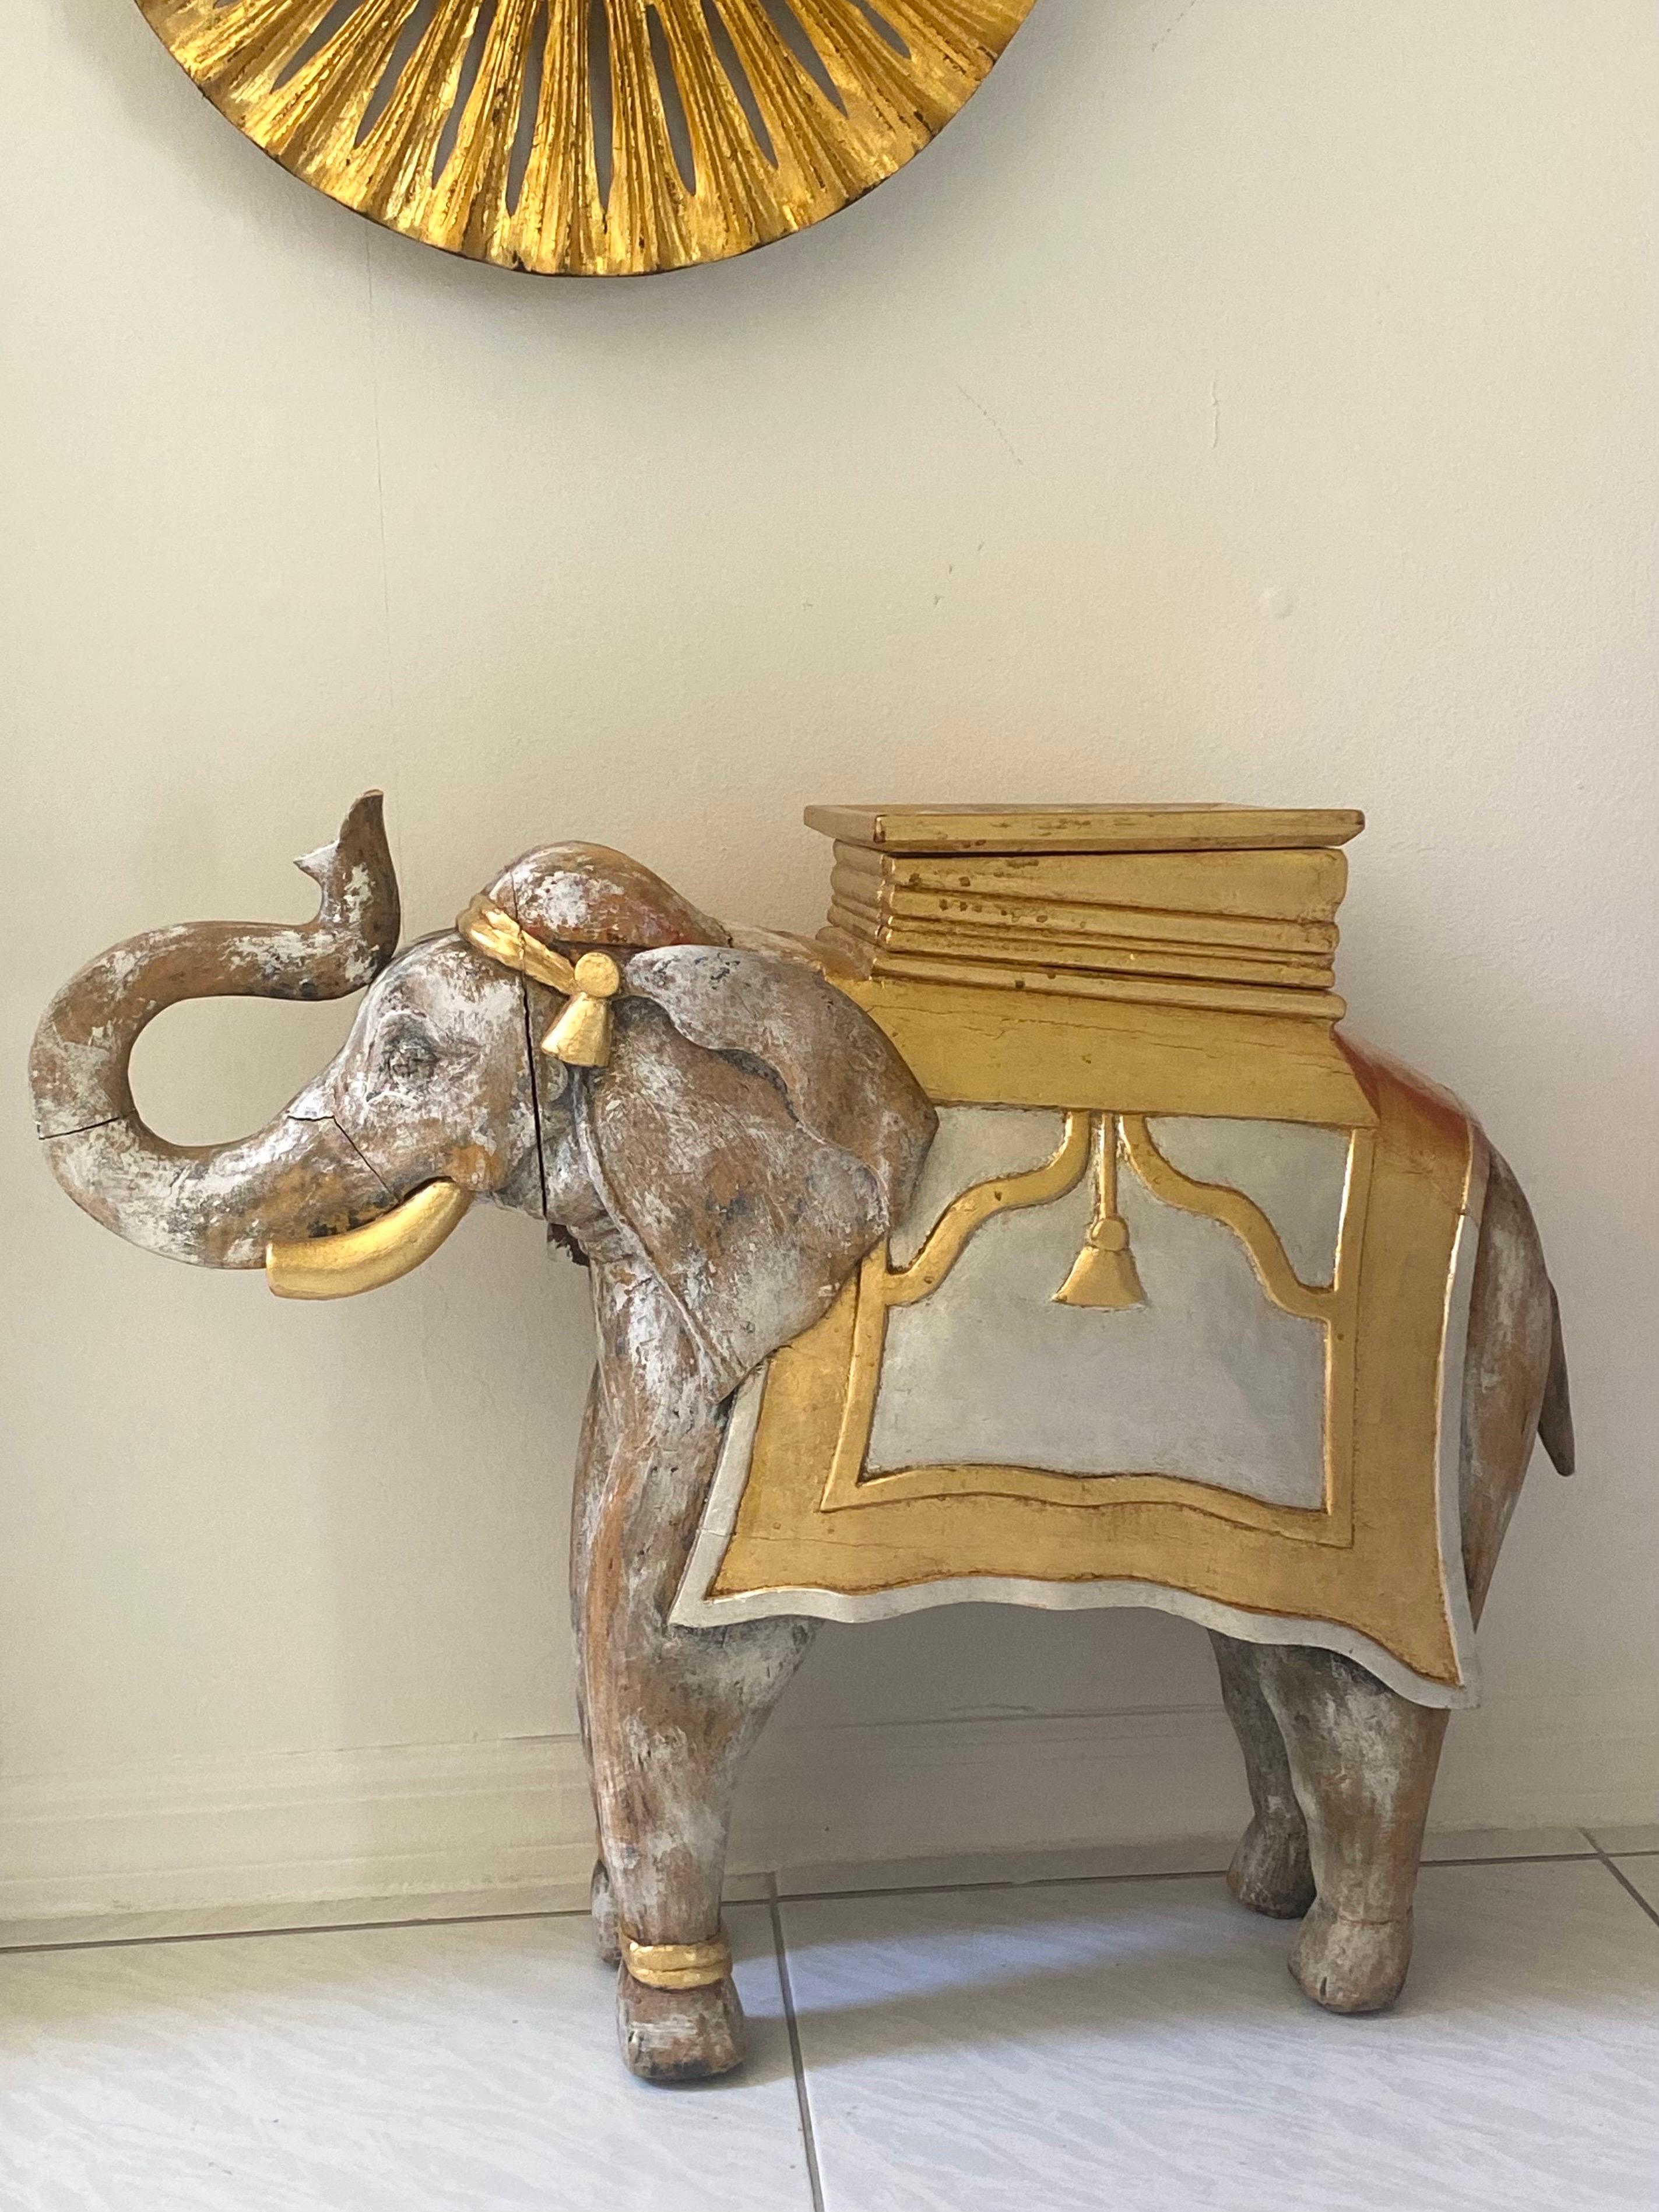 20th Century Carved Wood and Gilded Gold Elephant Stool with Storage